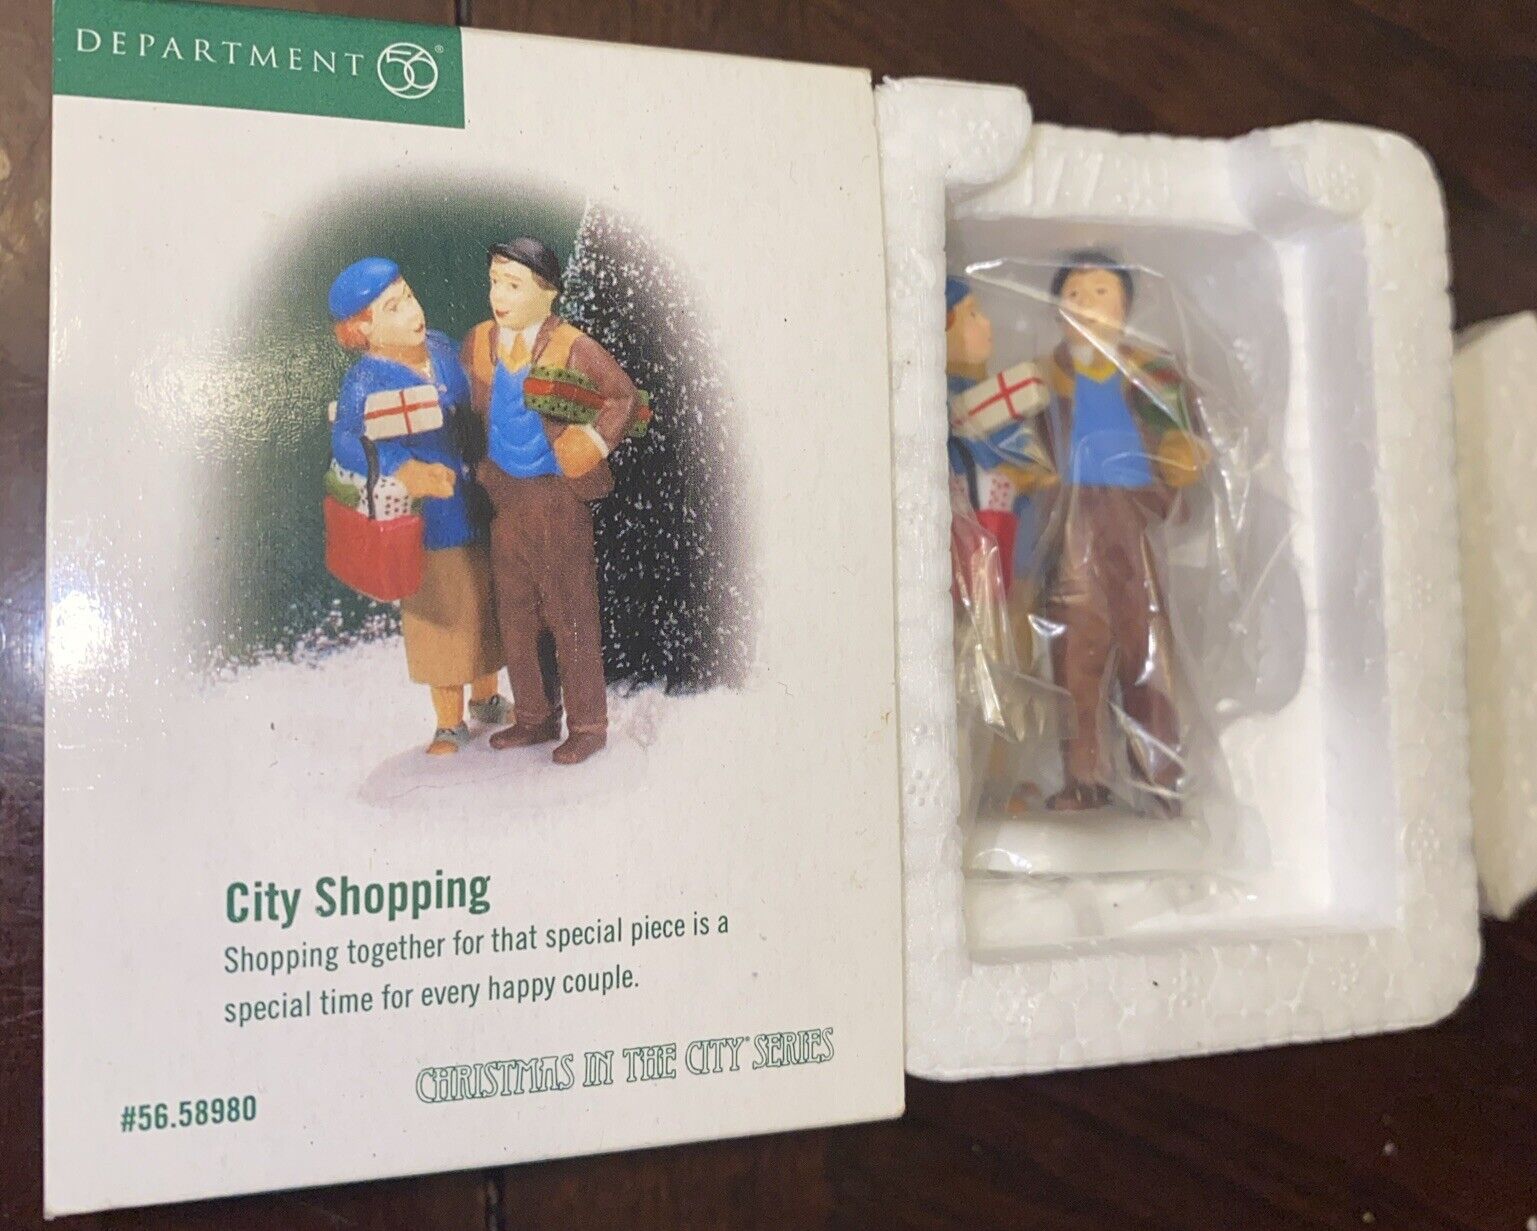 DEPT 56 CITY SHOPPING 58980 CHRISTMAS IN THE CITY SNOW VILLAGE CIC